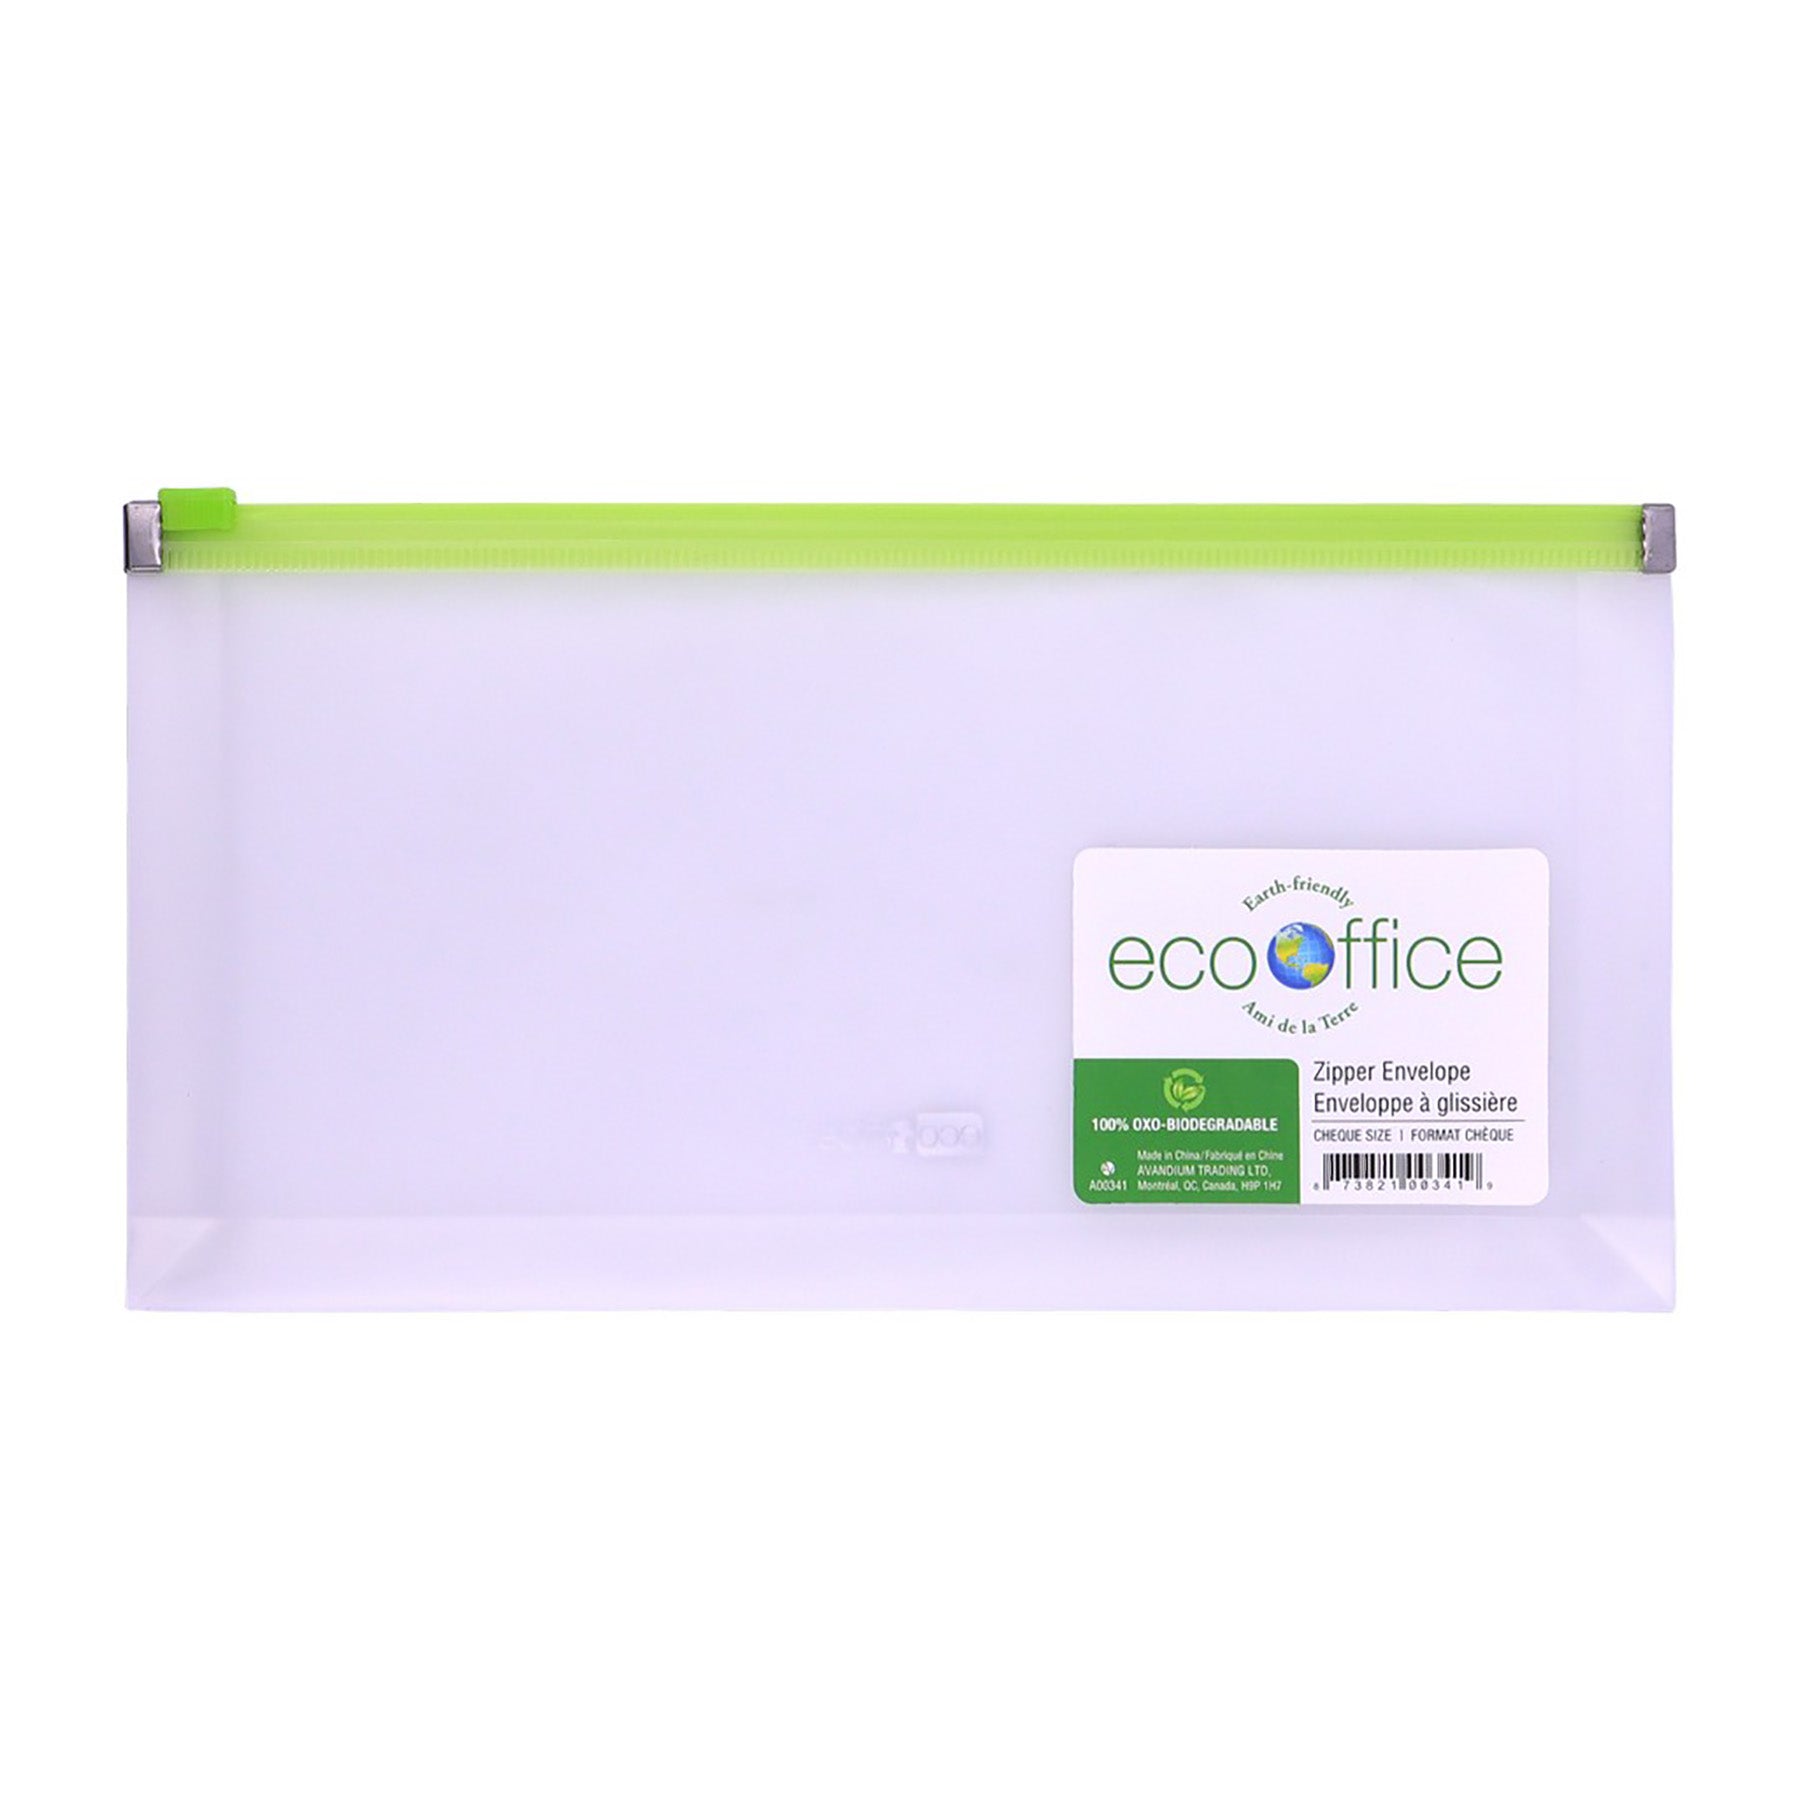 EcoOffice Expanding Zipper Envelope Clear Plastic 10.25x5.1in